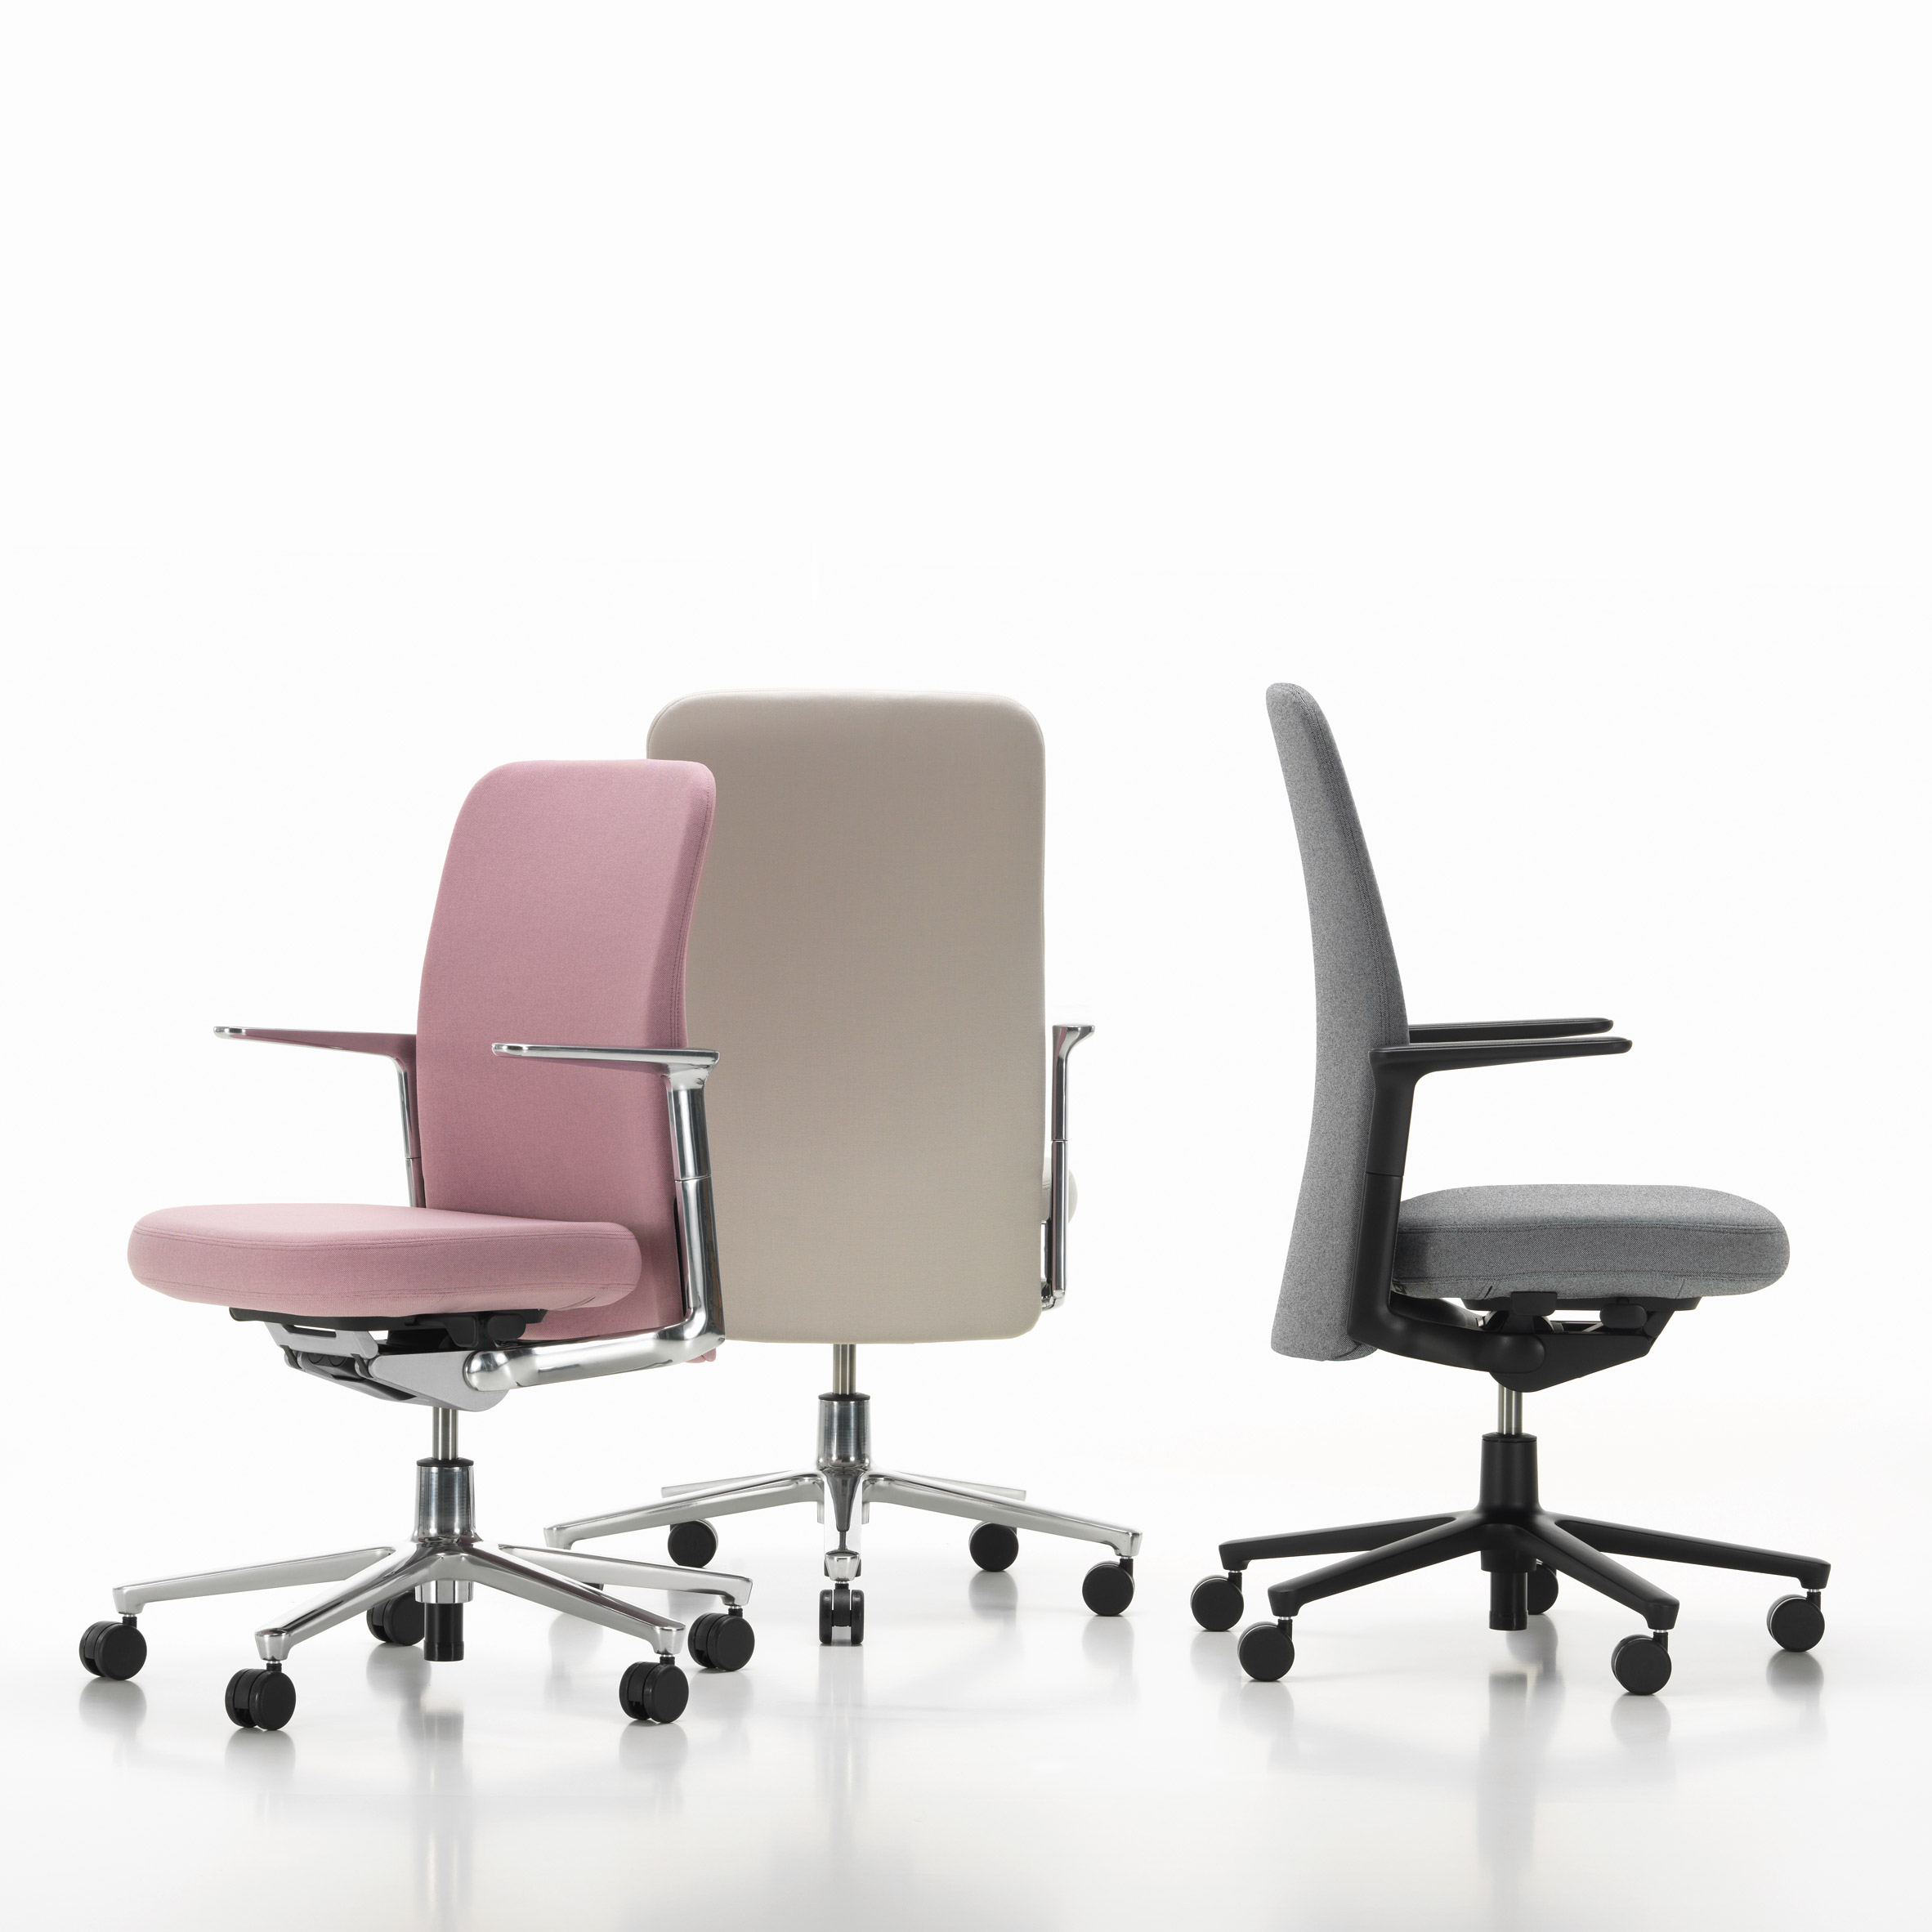 sq-pacific-chair-barber-and-ssgerby-for-vitra-design-furniture_dezeen_2364_col_1